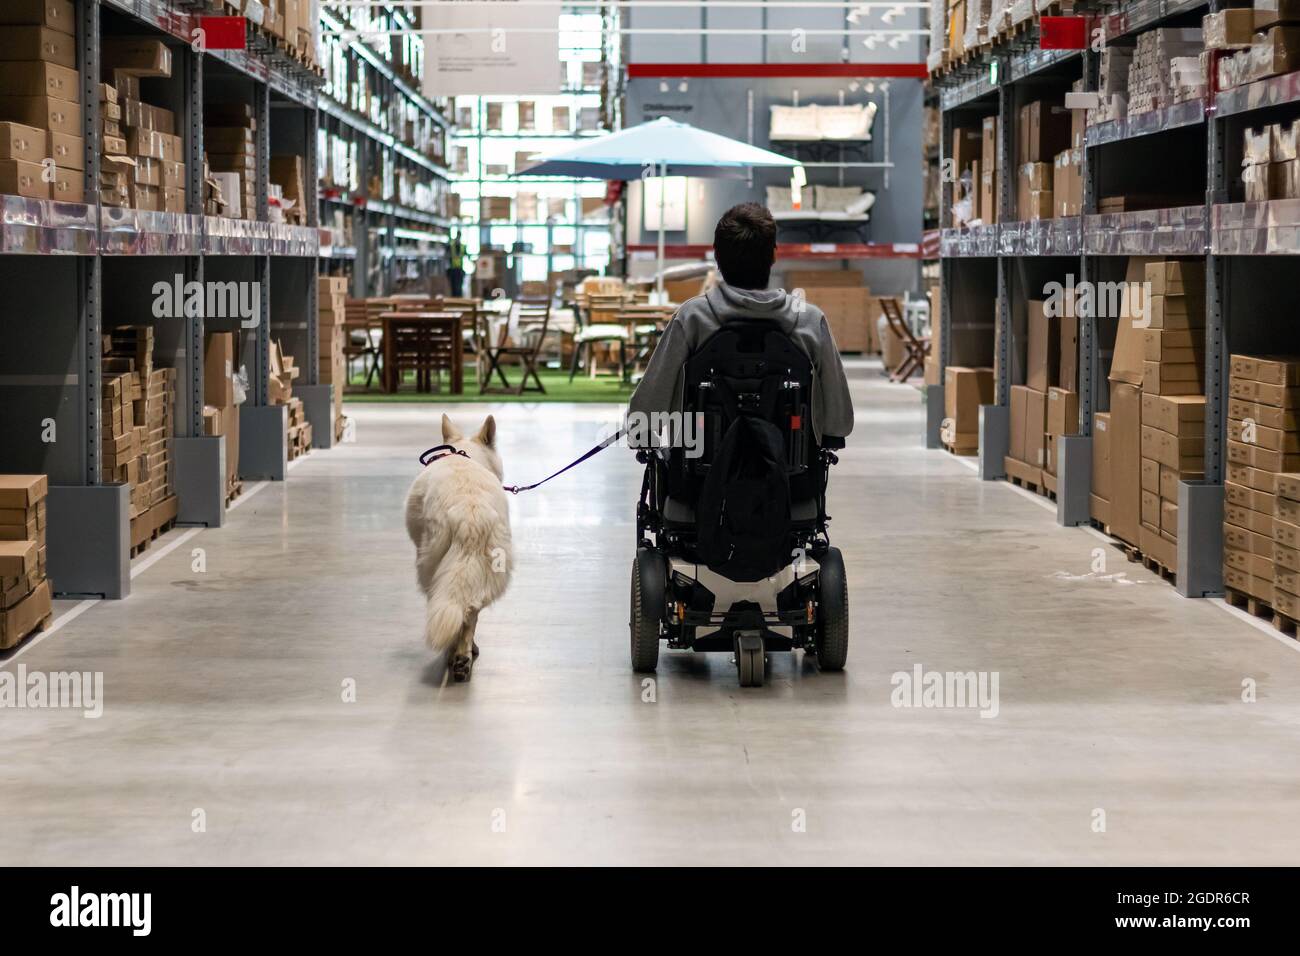 Service dog giving assistance to disabled person on wheelchair. Stock Photo